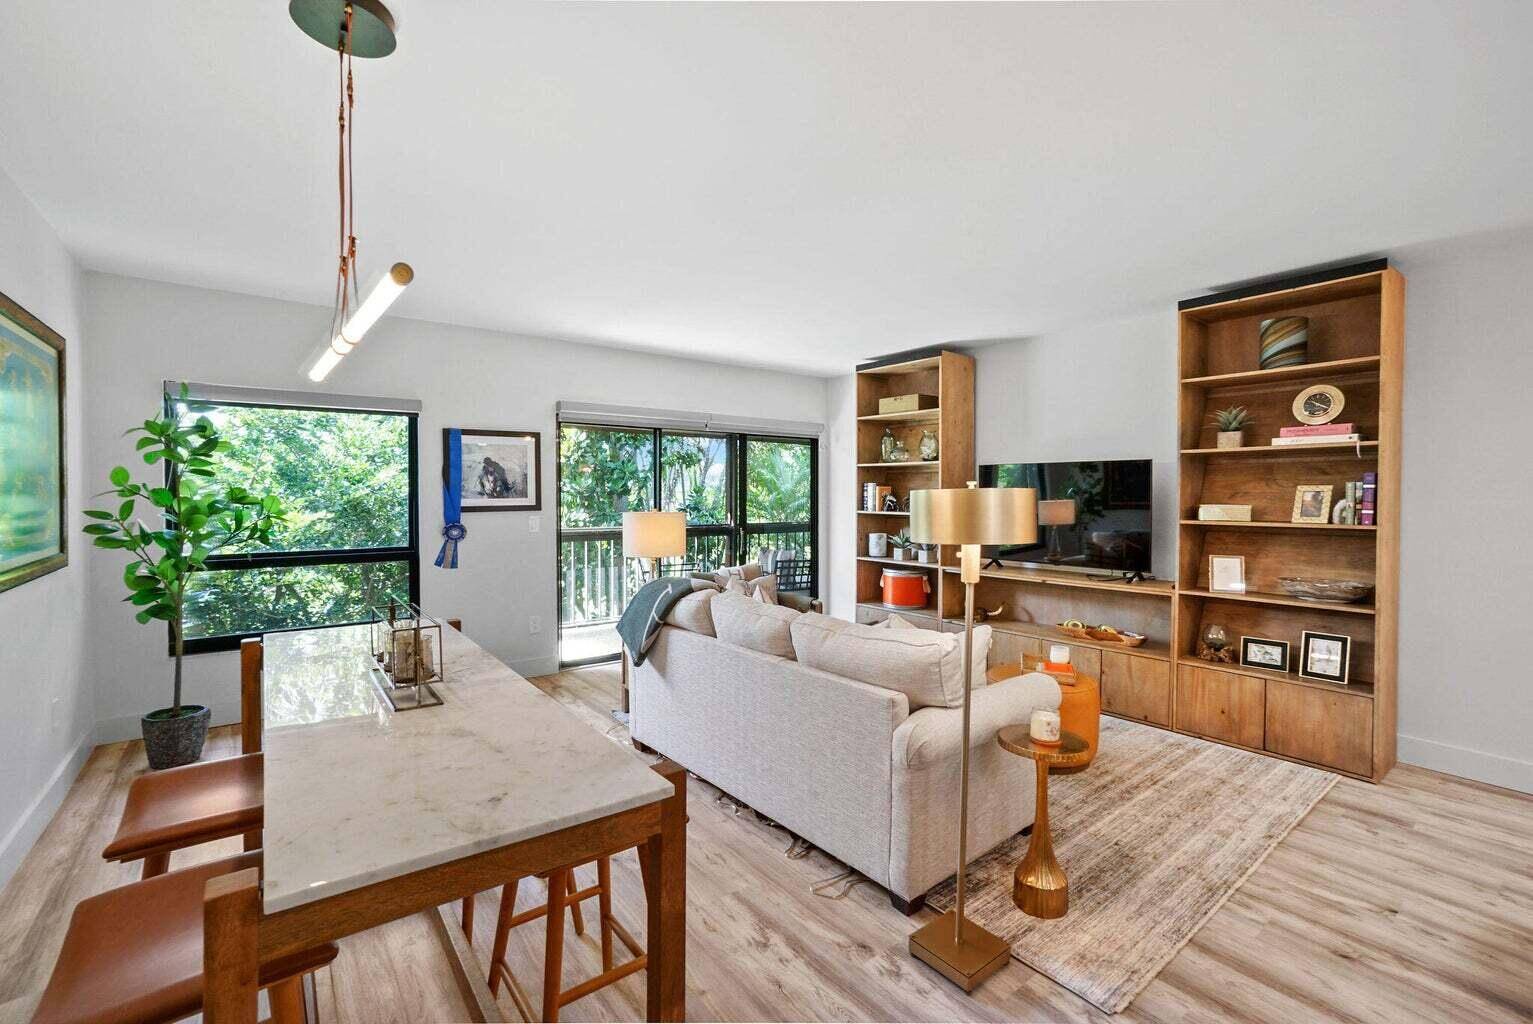 Welcome to this stylish, renovated Bagattelle condo in Palm Beach Polo Club nestled in close proximity to equestrian venues.